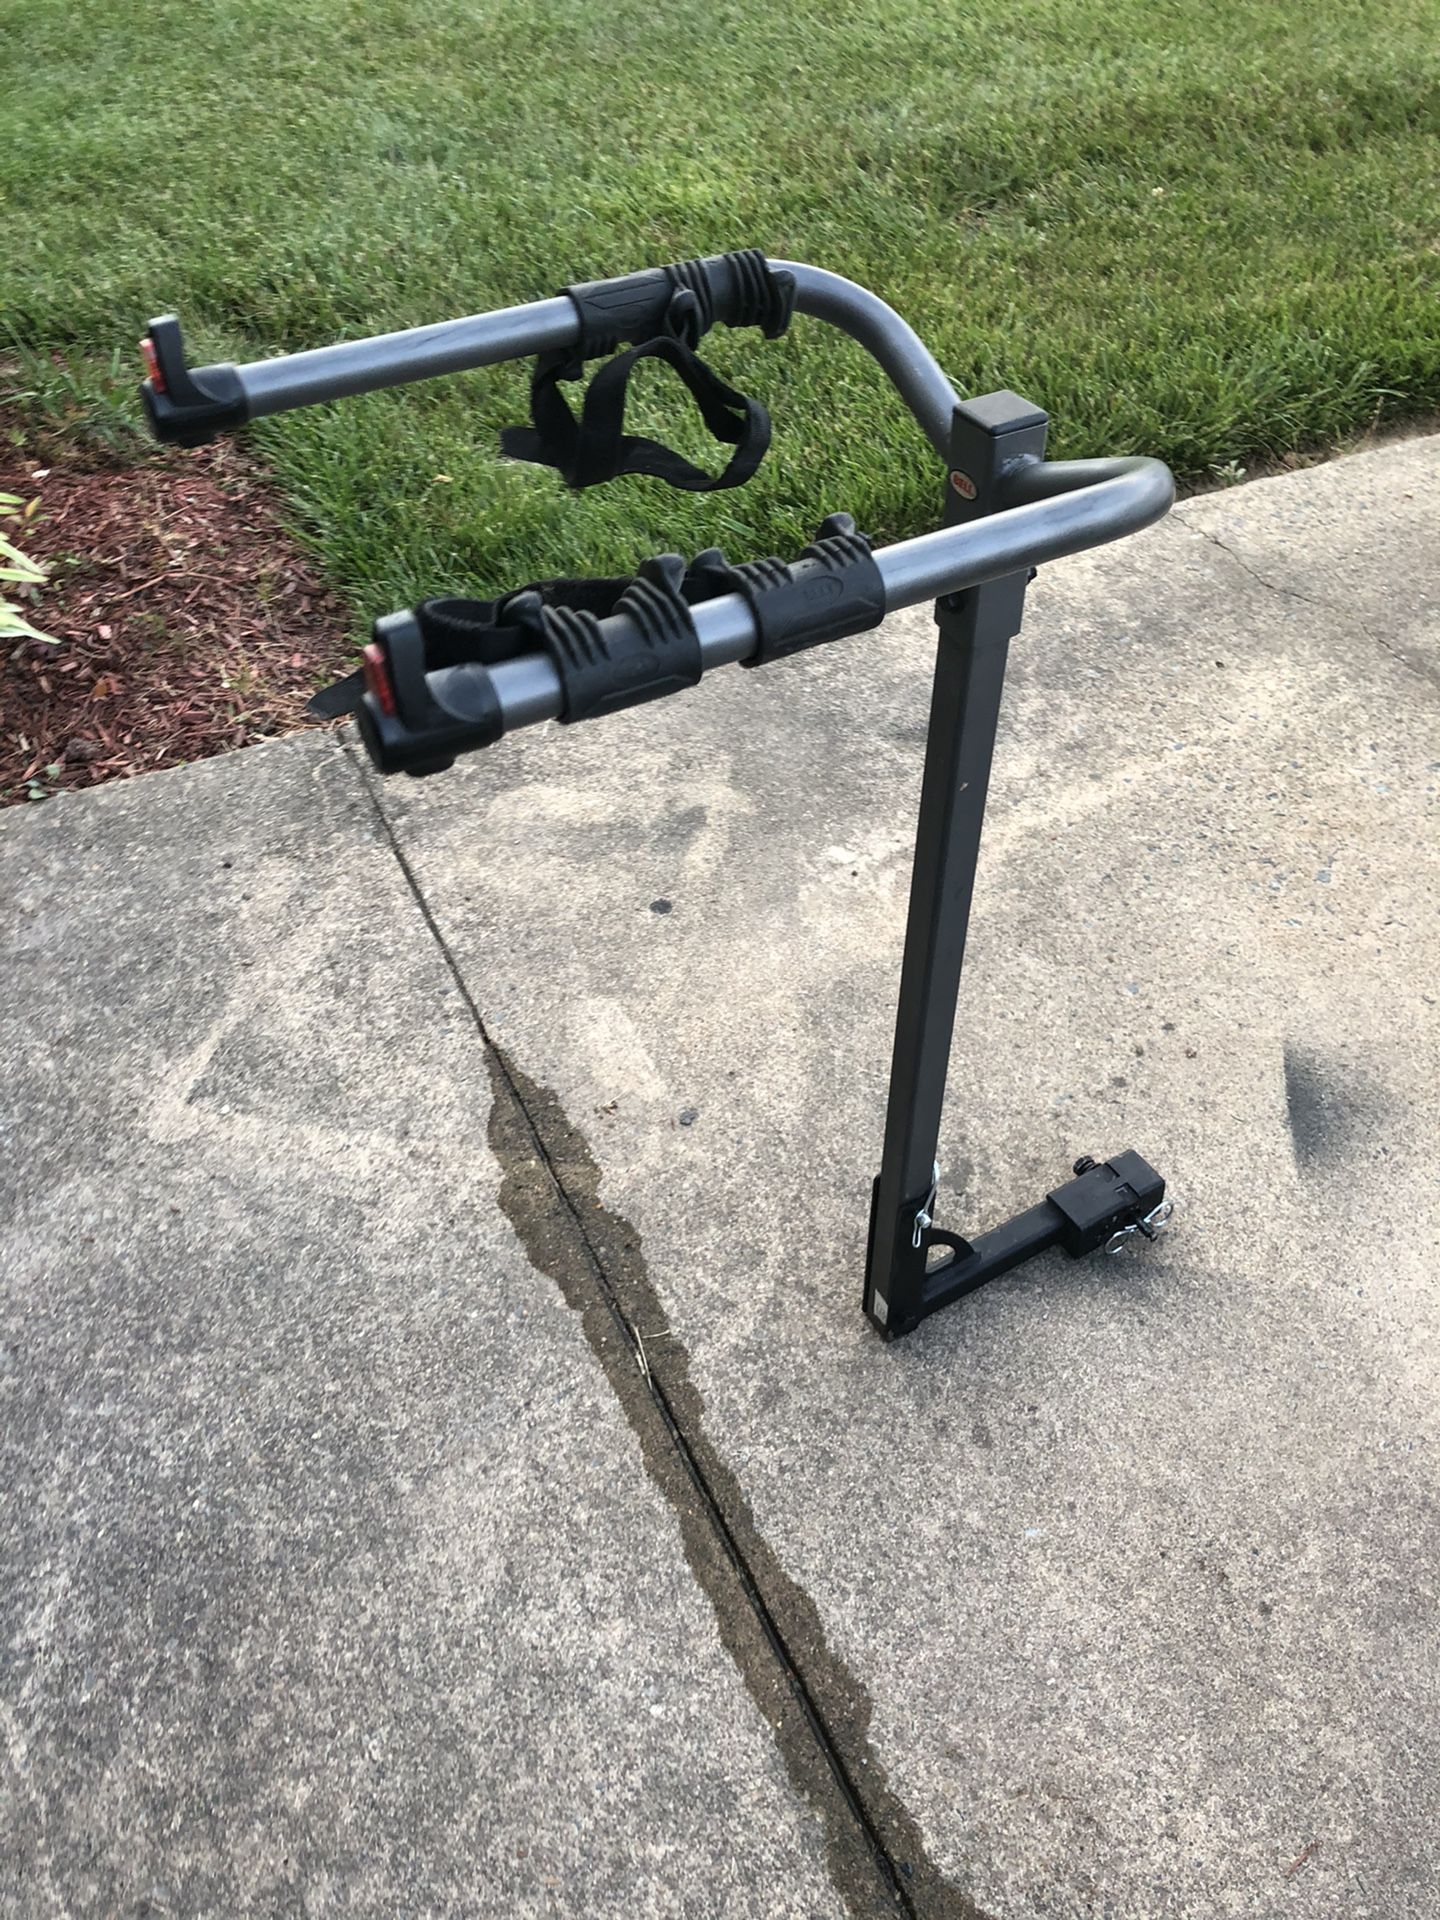 Bike/Bicycle Rack Carrier Hitch Mount with a 2" Hitch Receiver